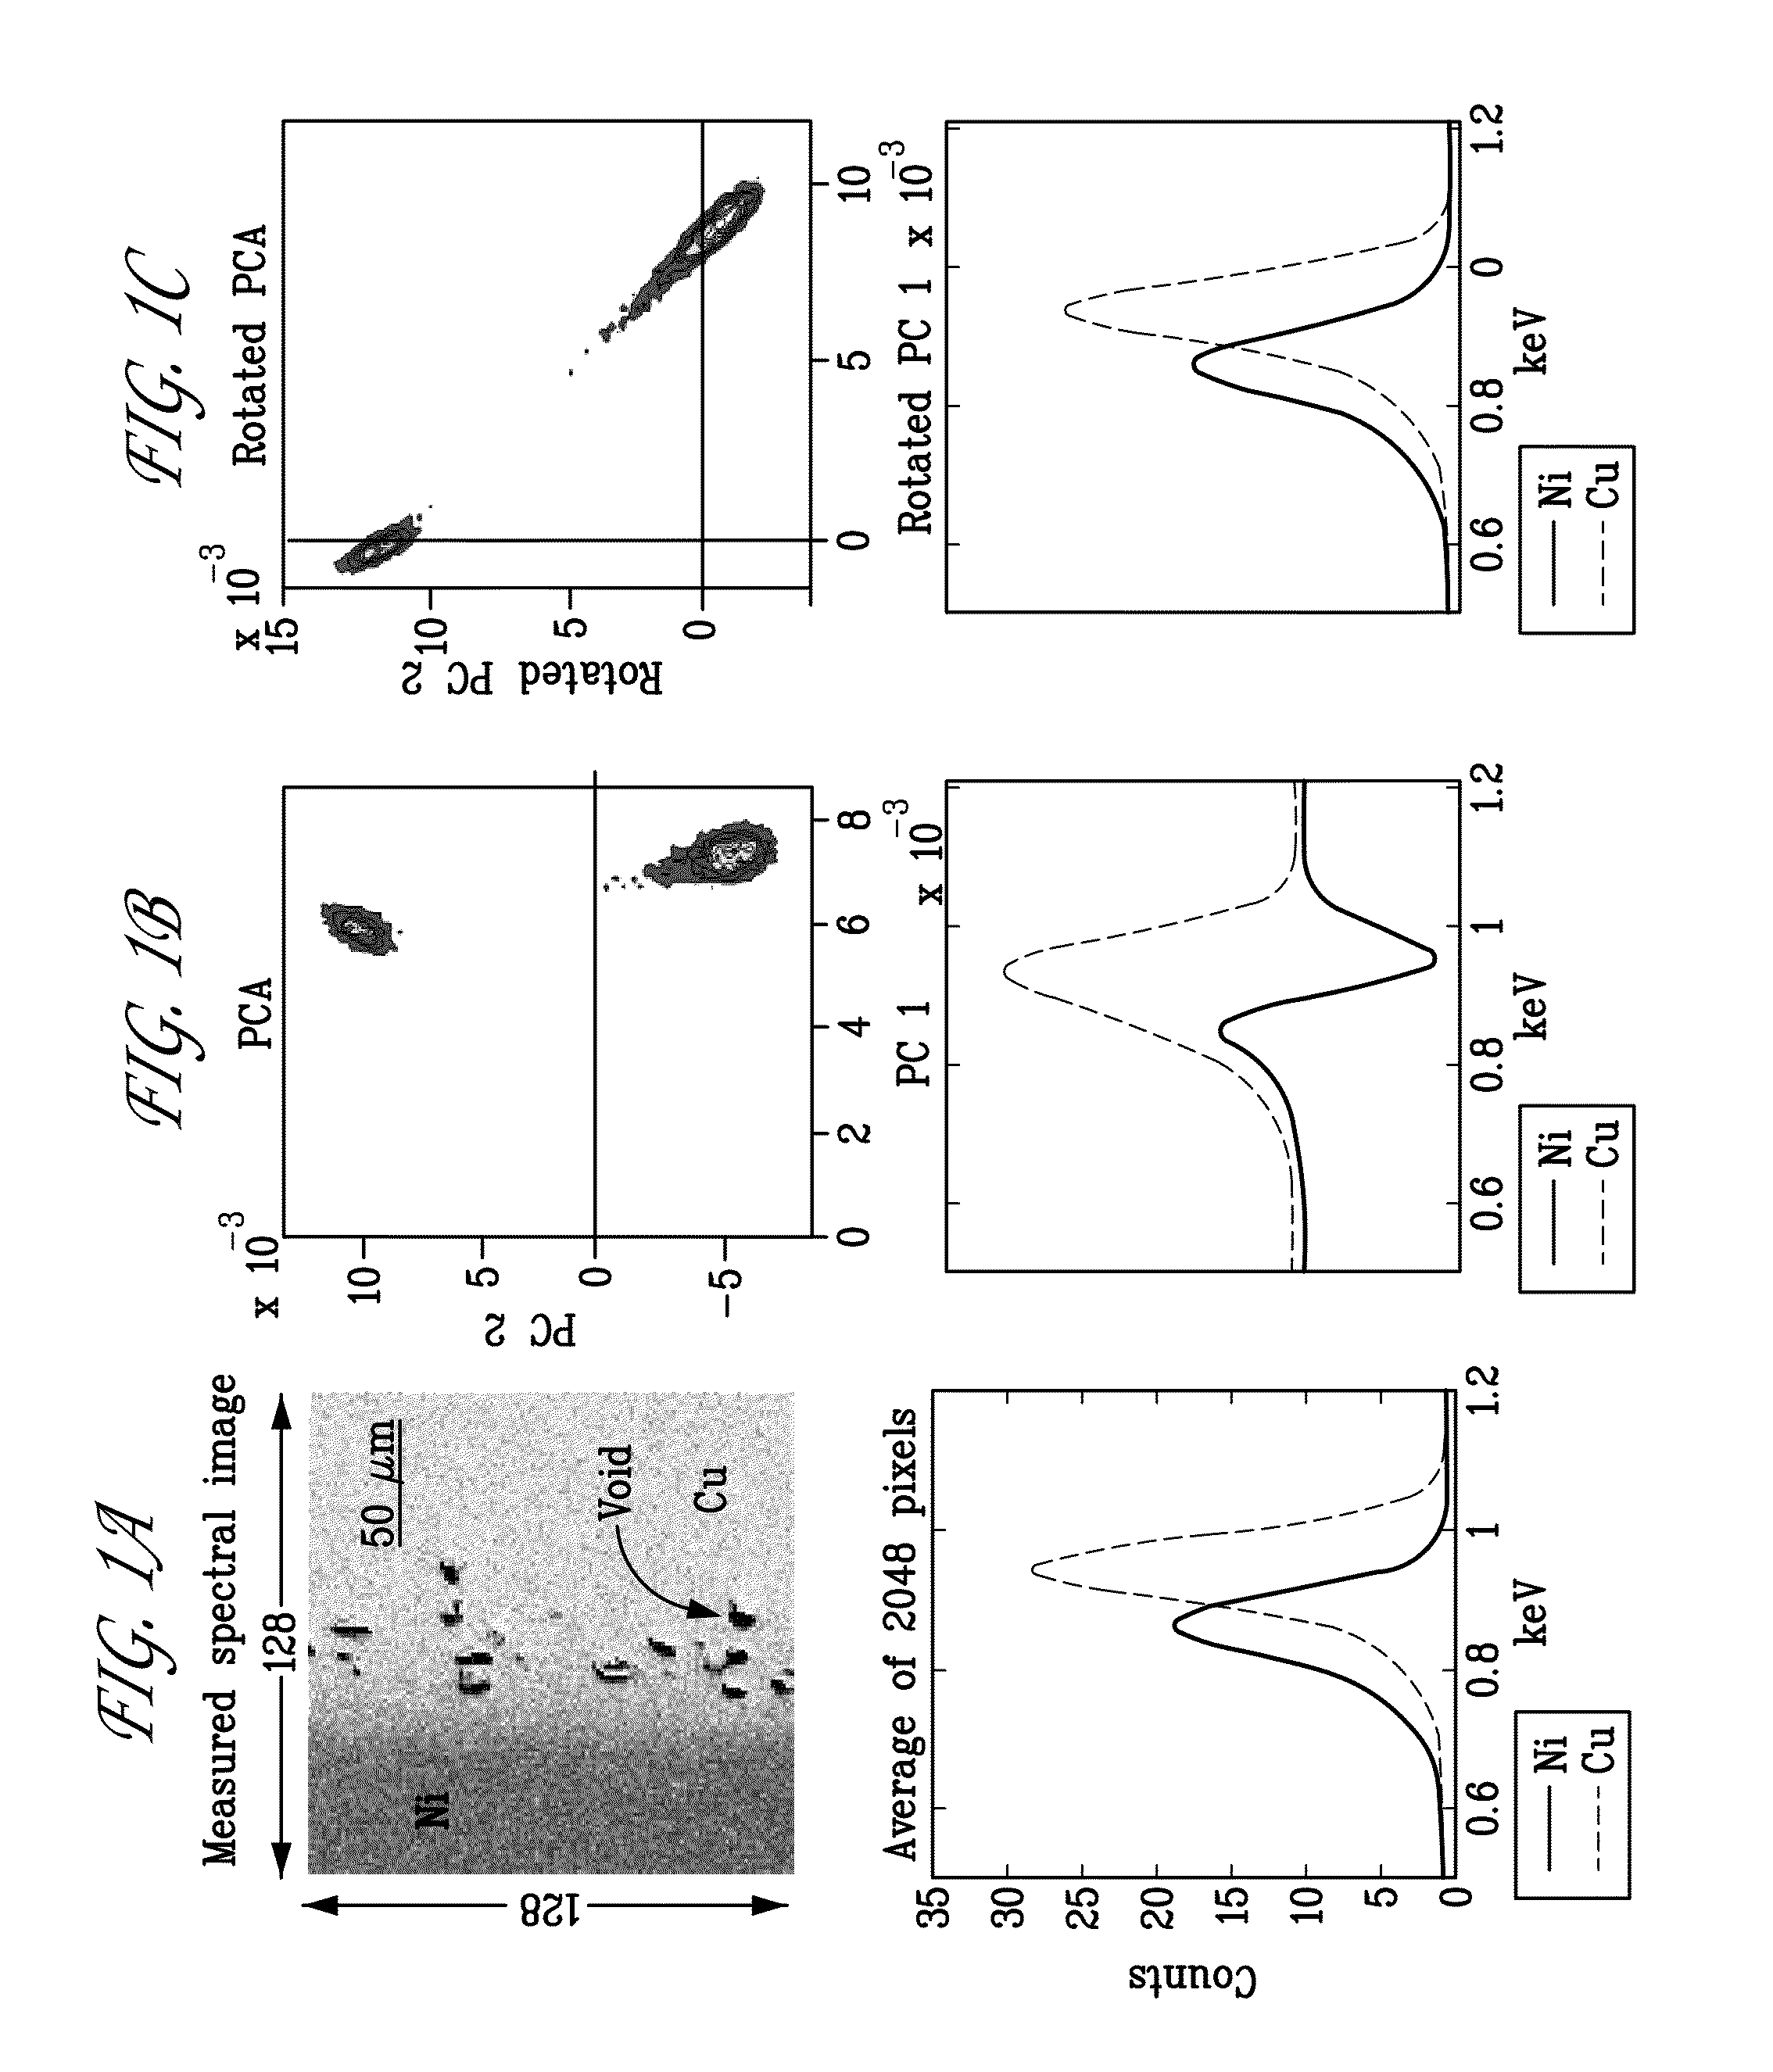 Methods for spectral image analysis by exploiting spatial simplicity